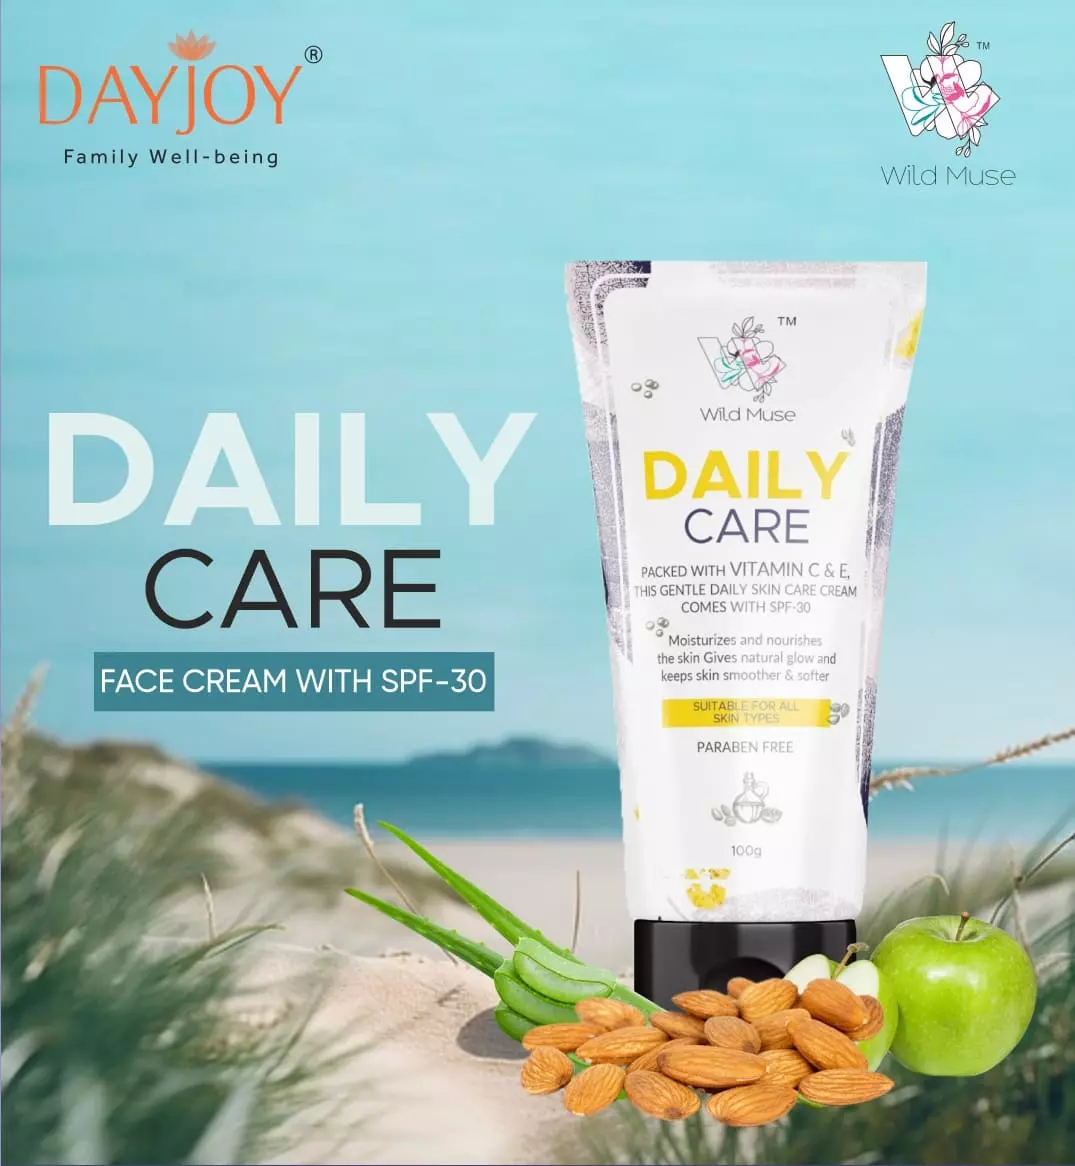 Wild Muse Daily Care Cream with SPF 30- glow skin naturally